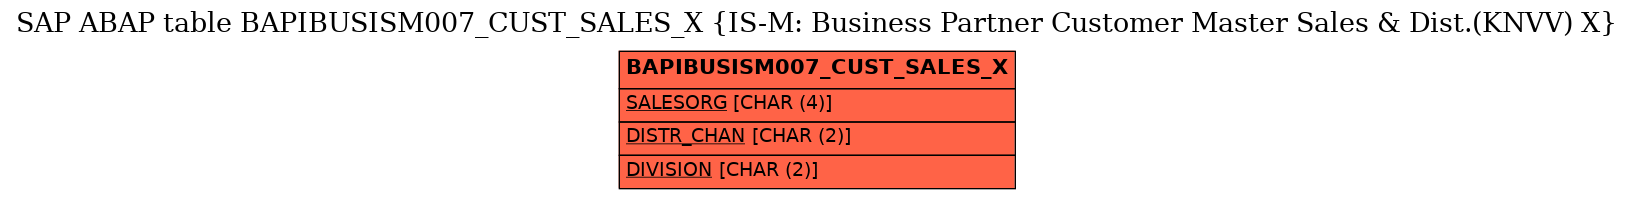 E-R Diagram for table BAPIBUSISM007_CUST_SALES_X (IS-M: Business Partner Customer Master Sales & Dist.(KNVV) X)